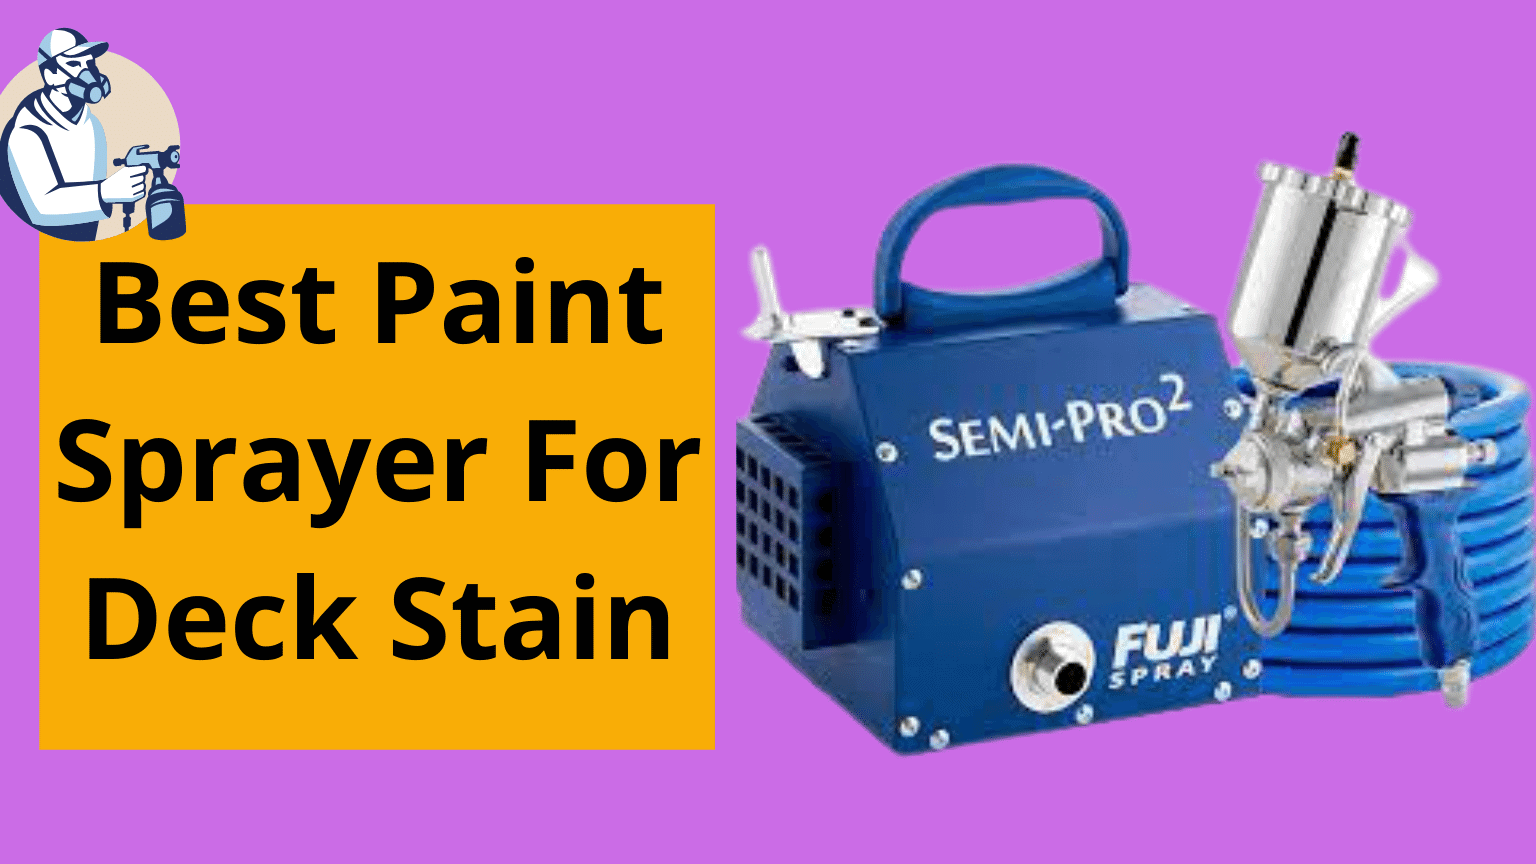 BEST PAINT SPRAYER FOR DECK STAIN